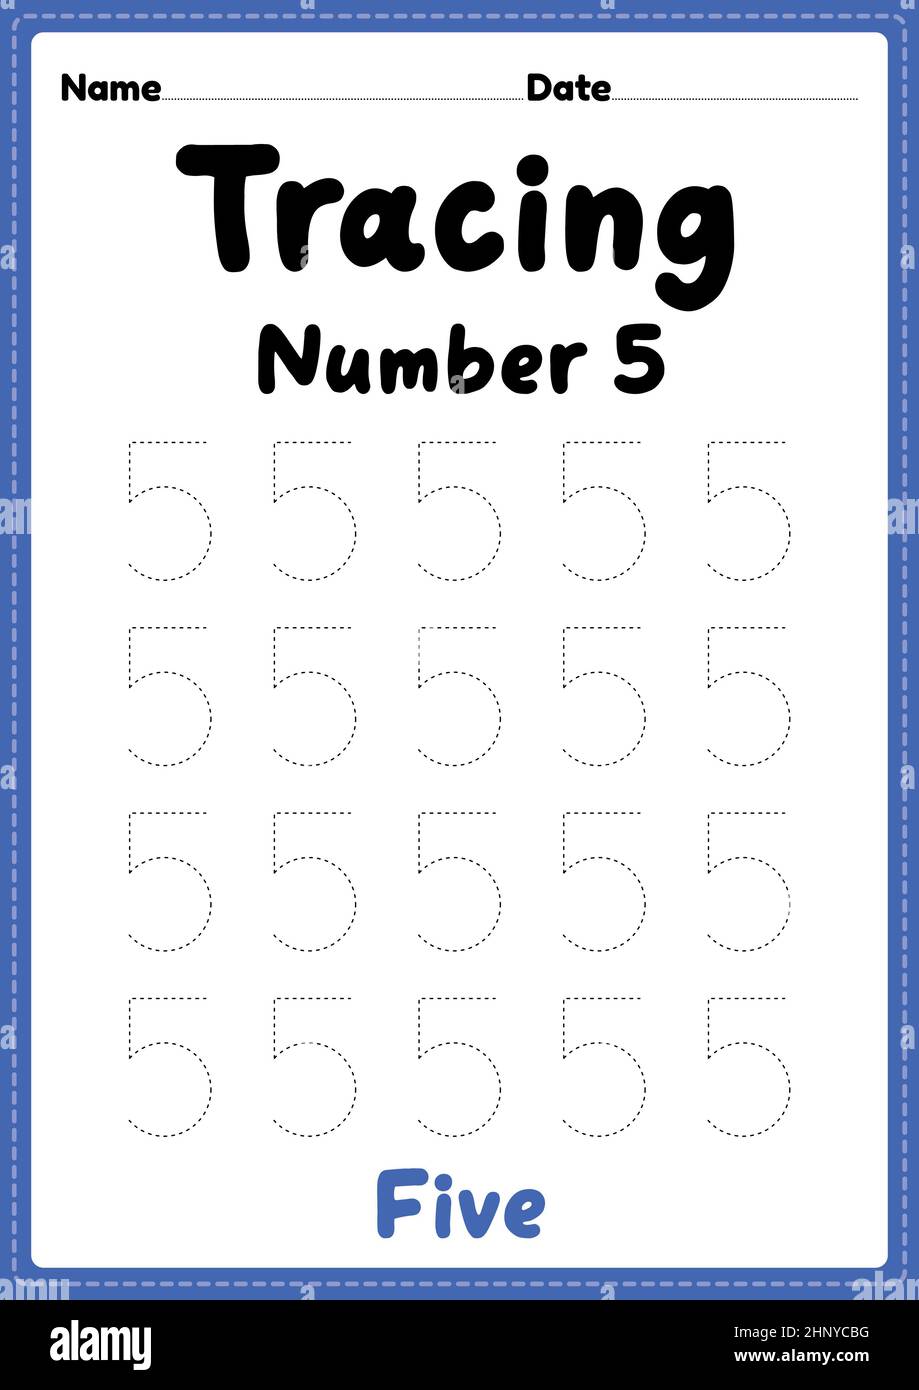 Tracing number 5 worksheet for kindergarten, preschool and Montessori kids for learning numbers and handwriting practice activities. Stock Photo